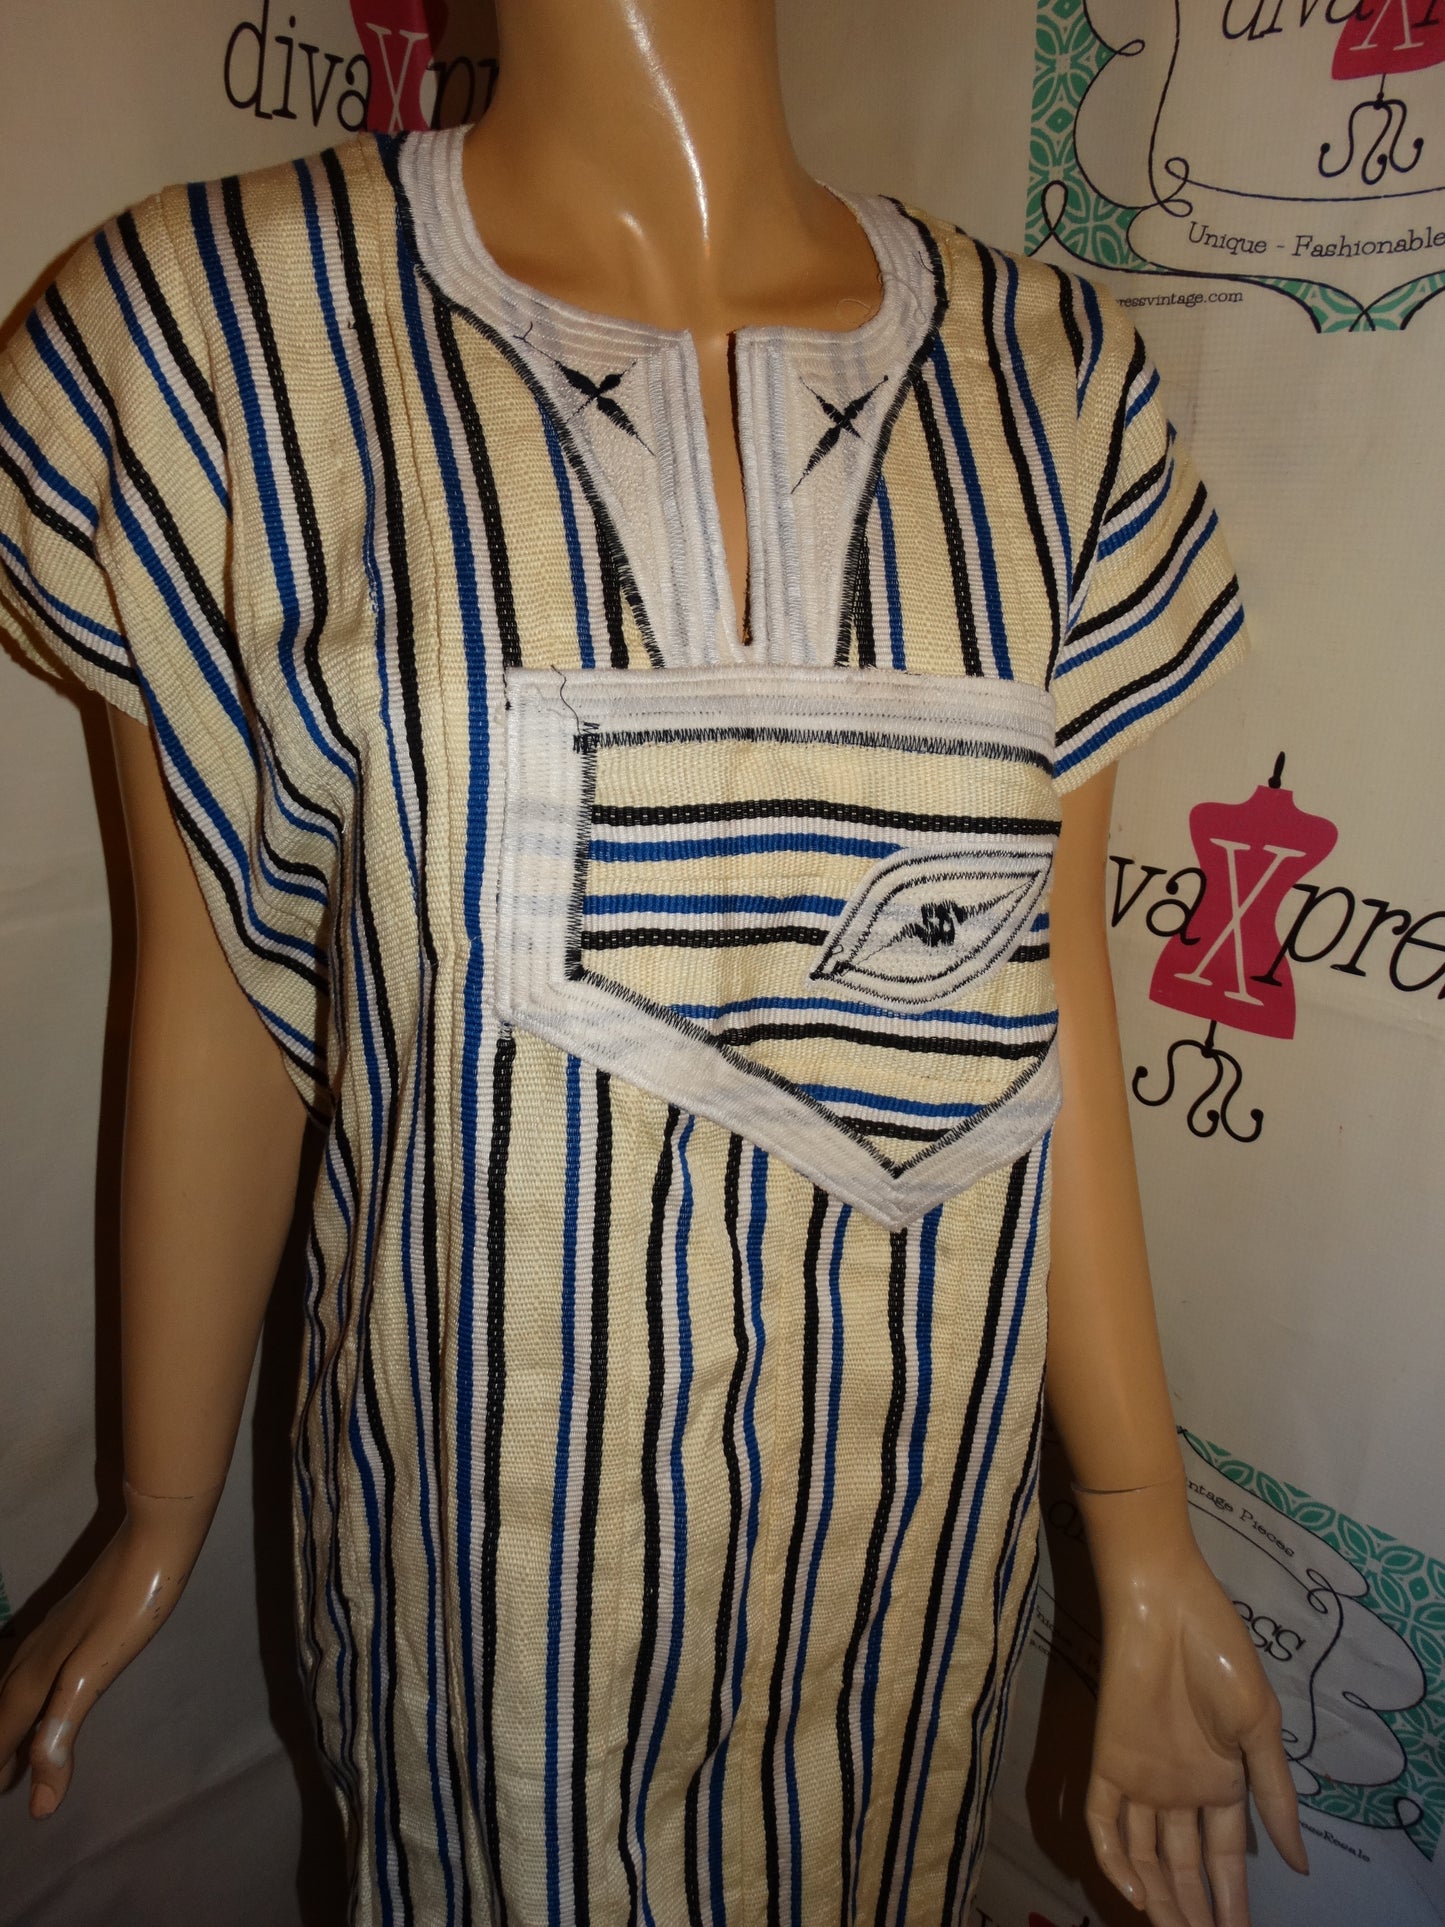 Vintage Yellow/White Blue African Style Dress Size XL